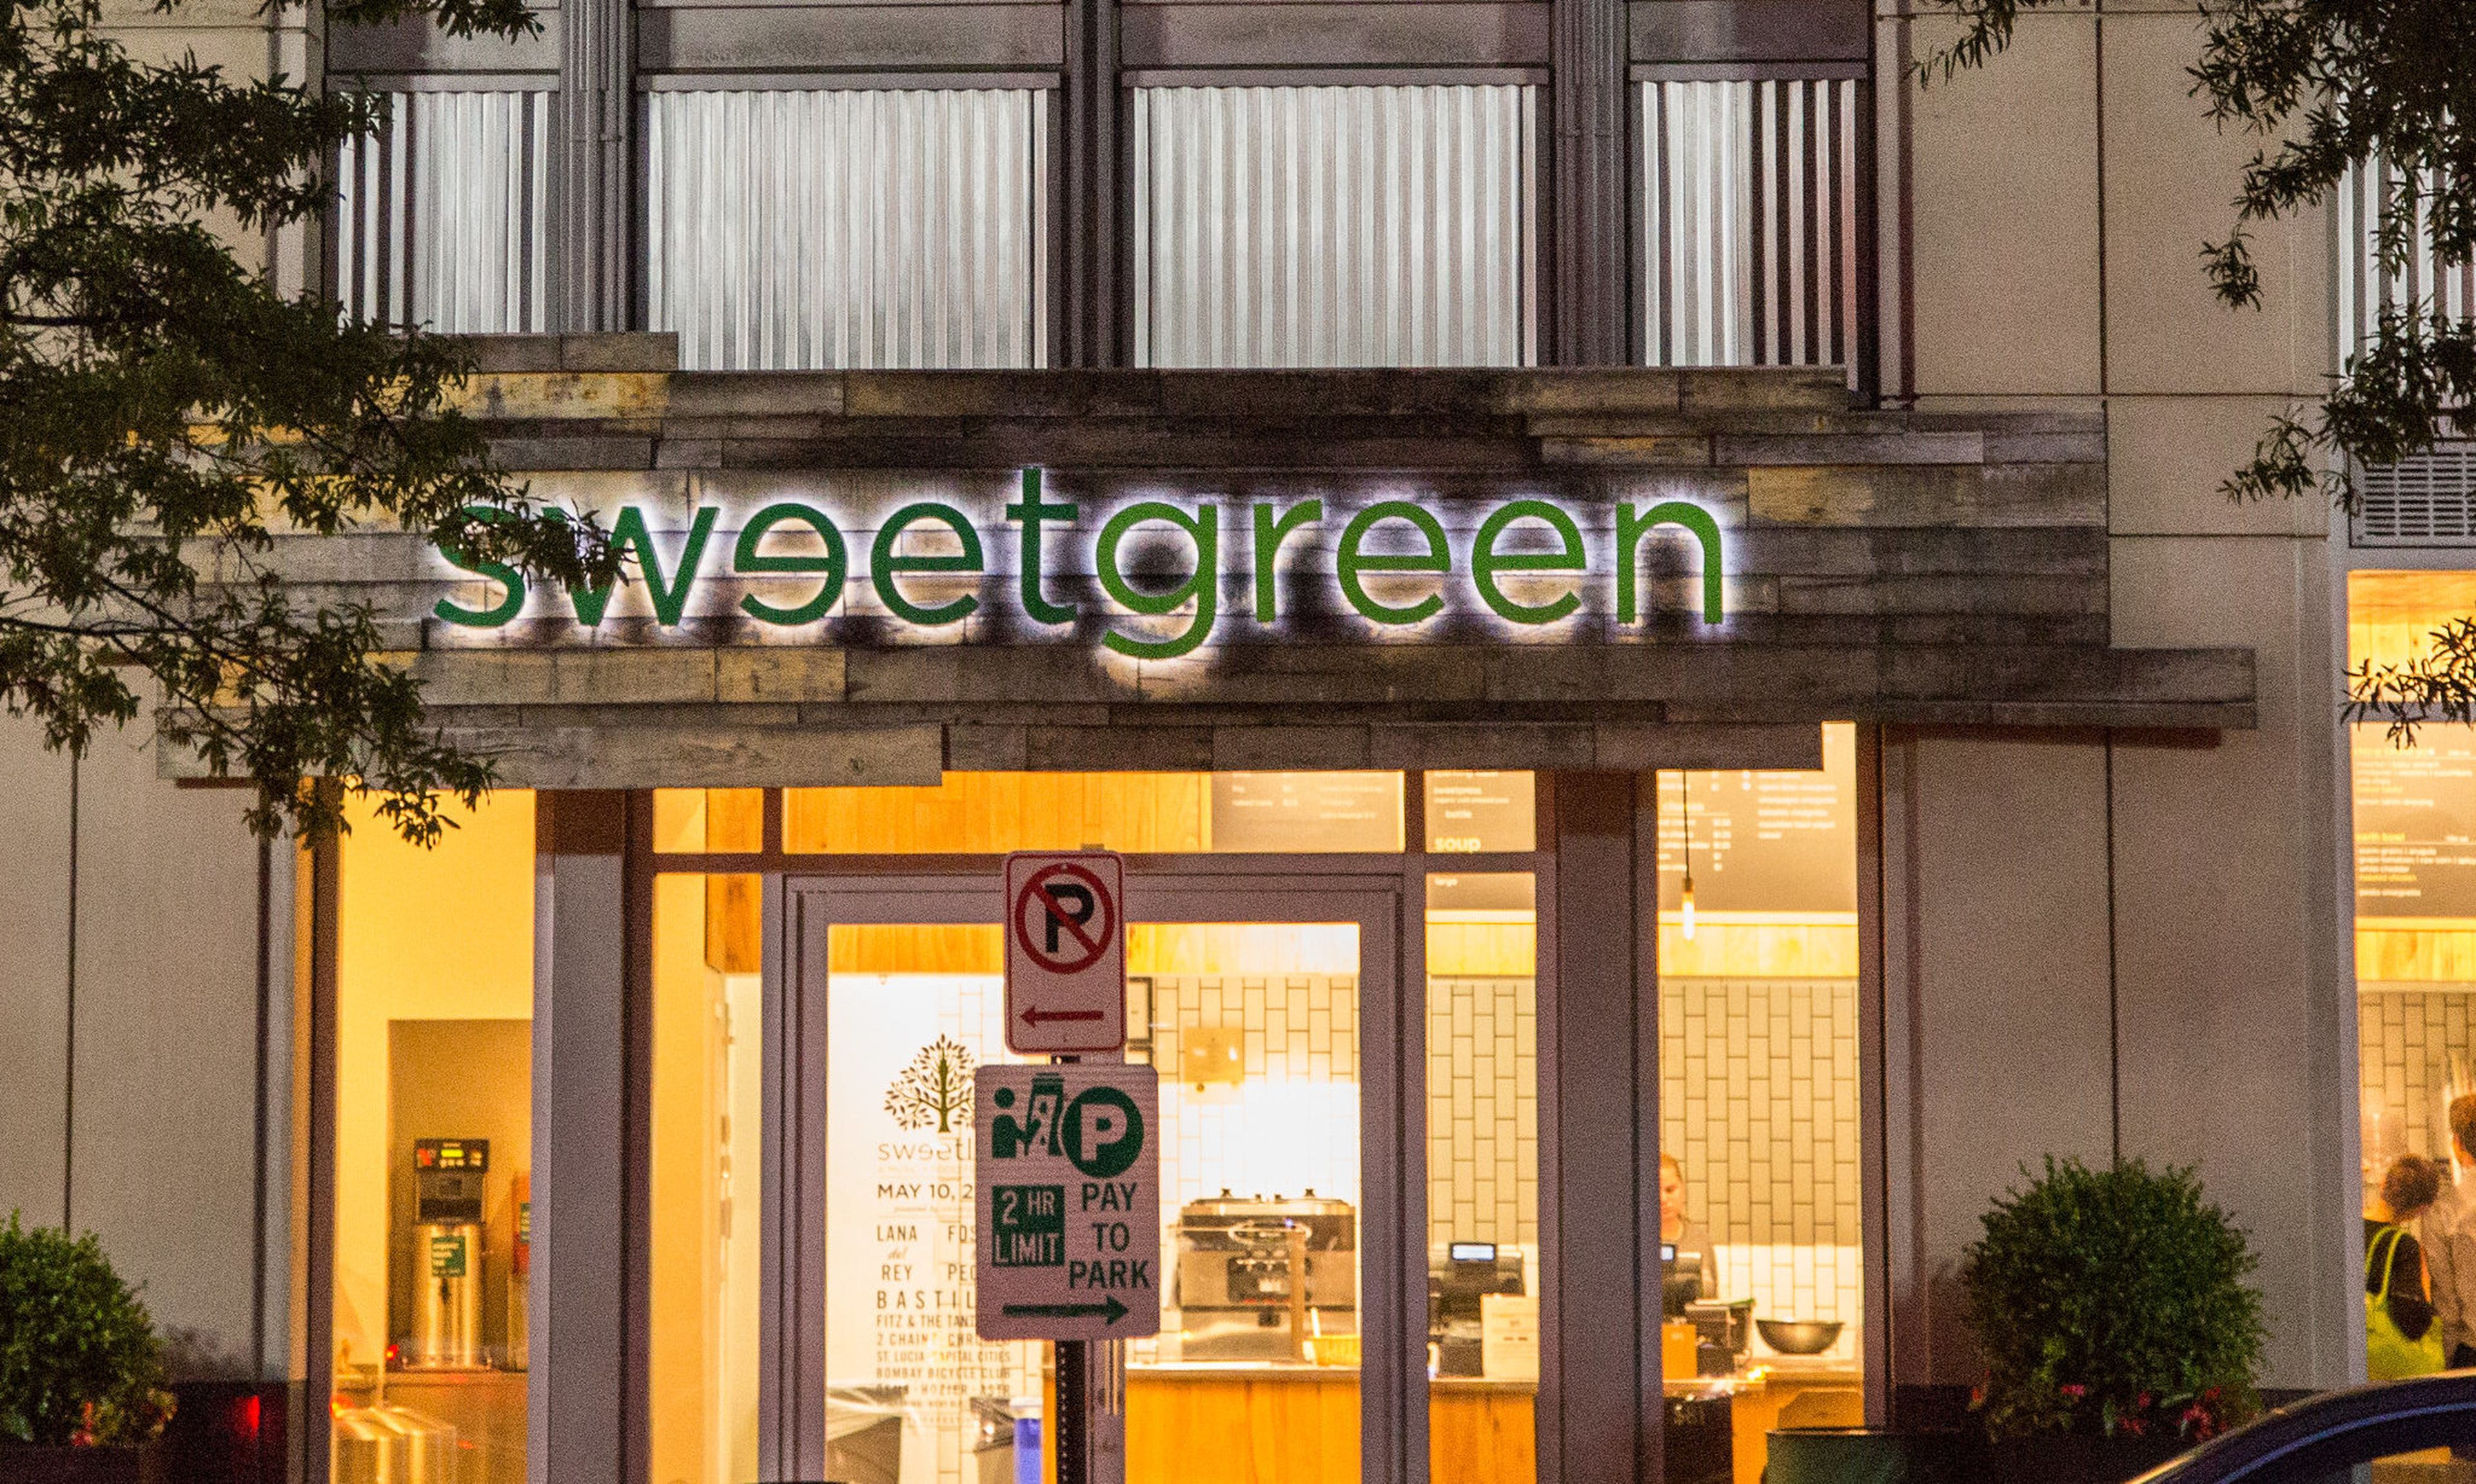 (&#8220;sweetgreen – Ballston, Arlington&#8221; by Tony Webster is licensed under CC BY 2.0)